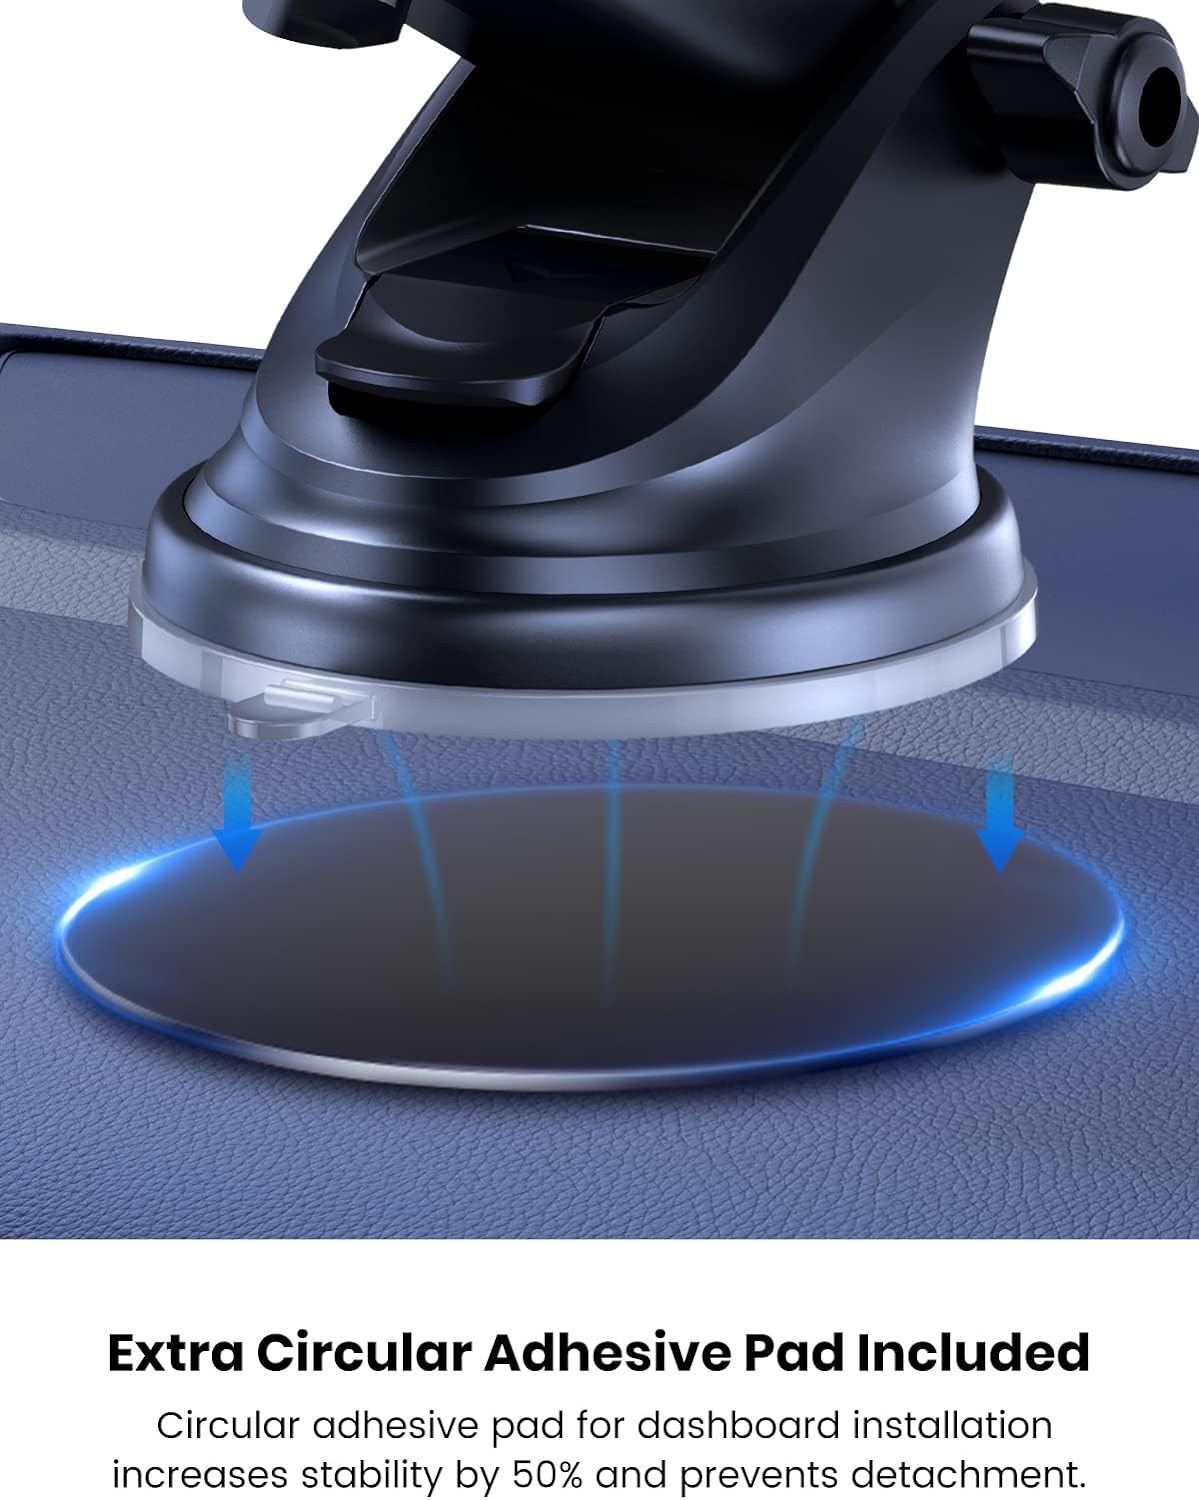 TOPK Car Phone Holder, Phone Holder for Cars Dashboard/Windscreen Adjustable 360° Rotation Upgraded Strong Suction Car Phone Mount for All 4.7 to 6.8 inch Smartphones - Amazing Gadgets Outlet